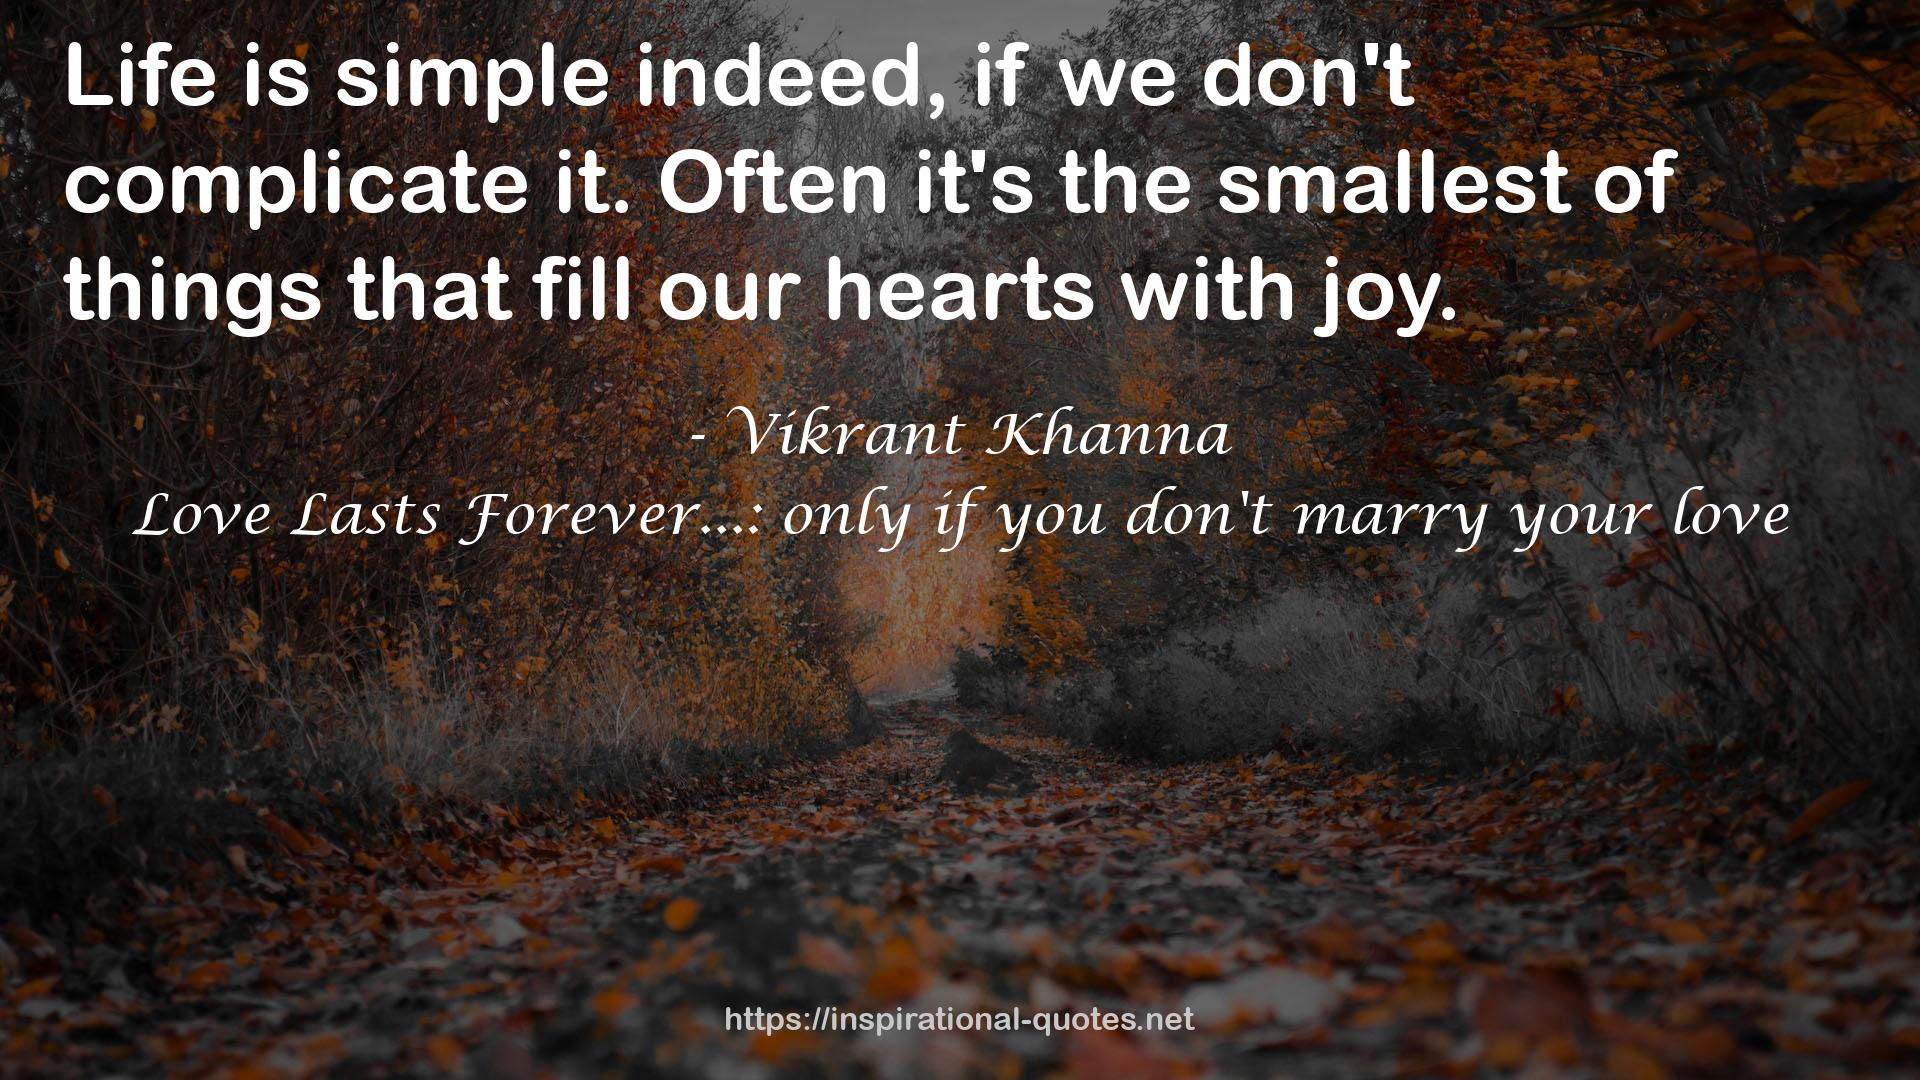 Love Lasts Forever...: only if you don't marry your love QUOTES